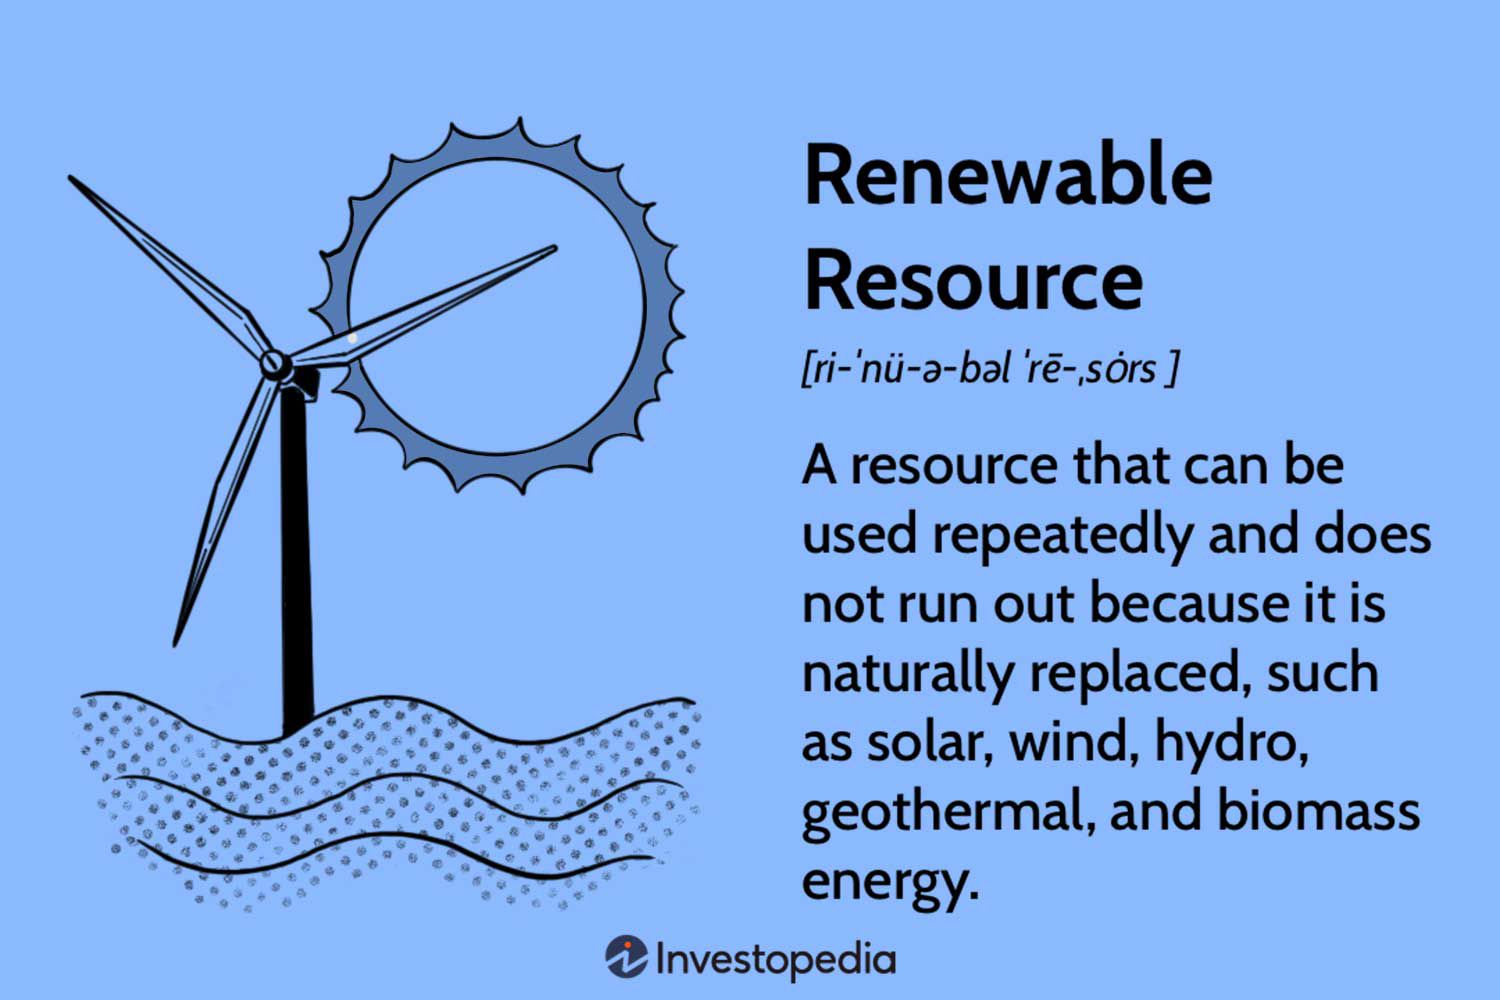 What is the importance of renewable energy resources?